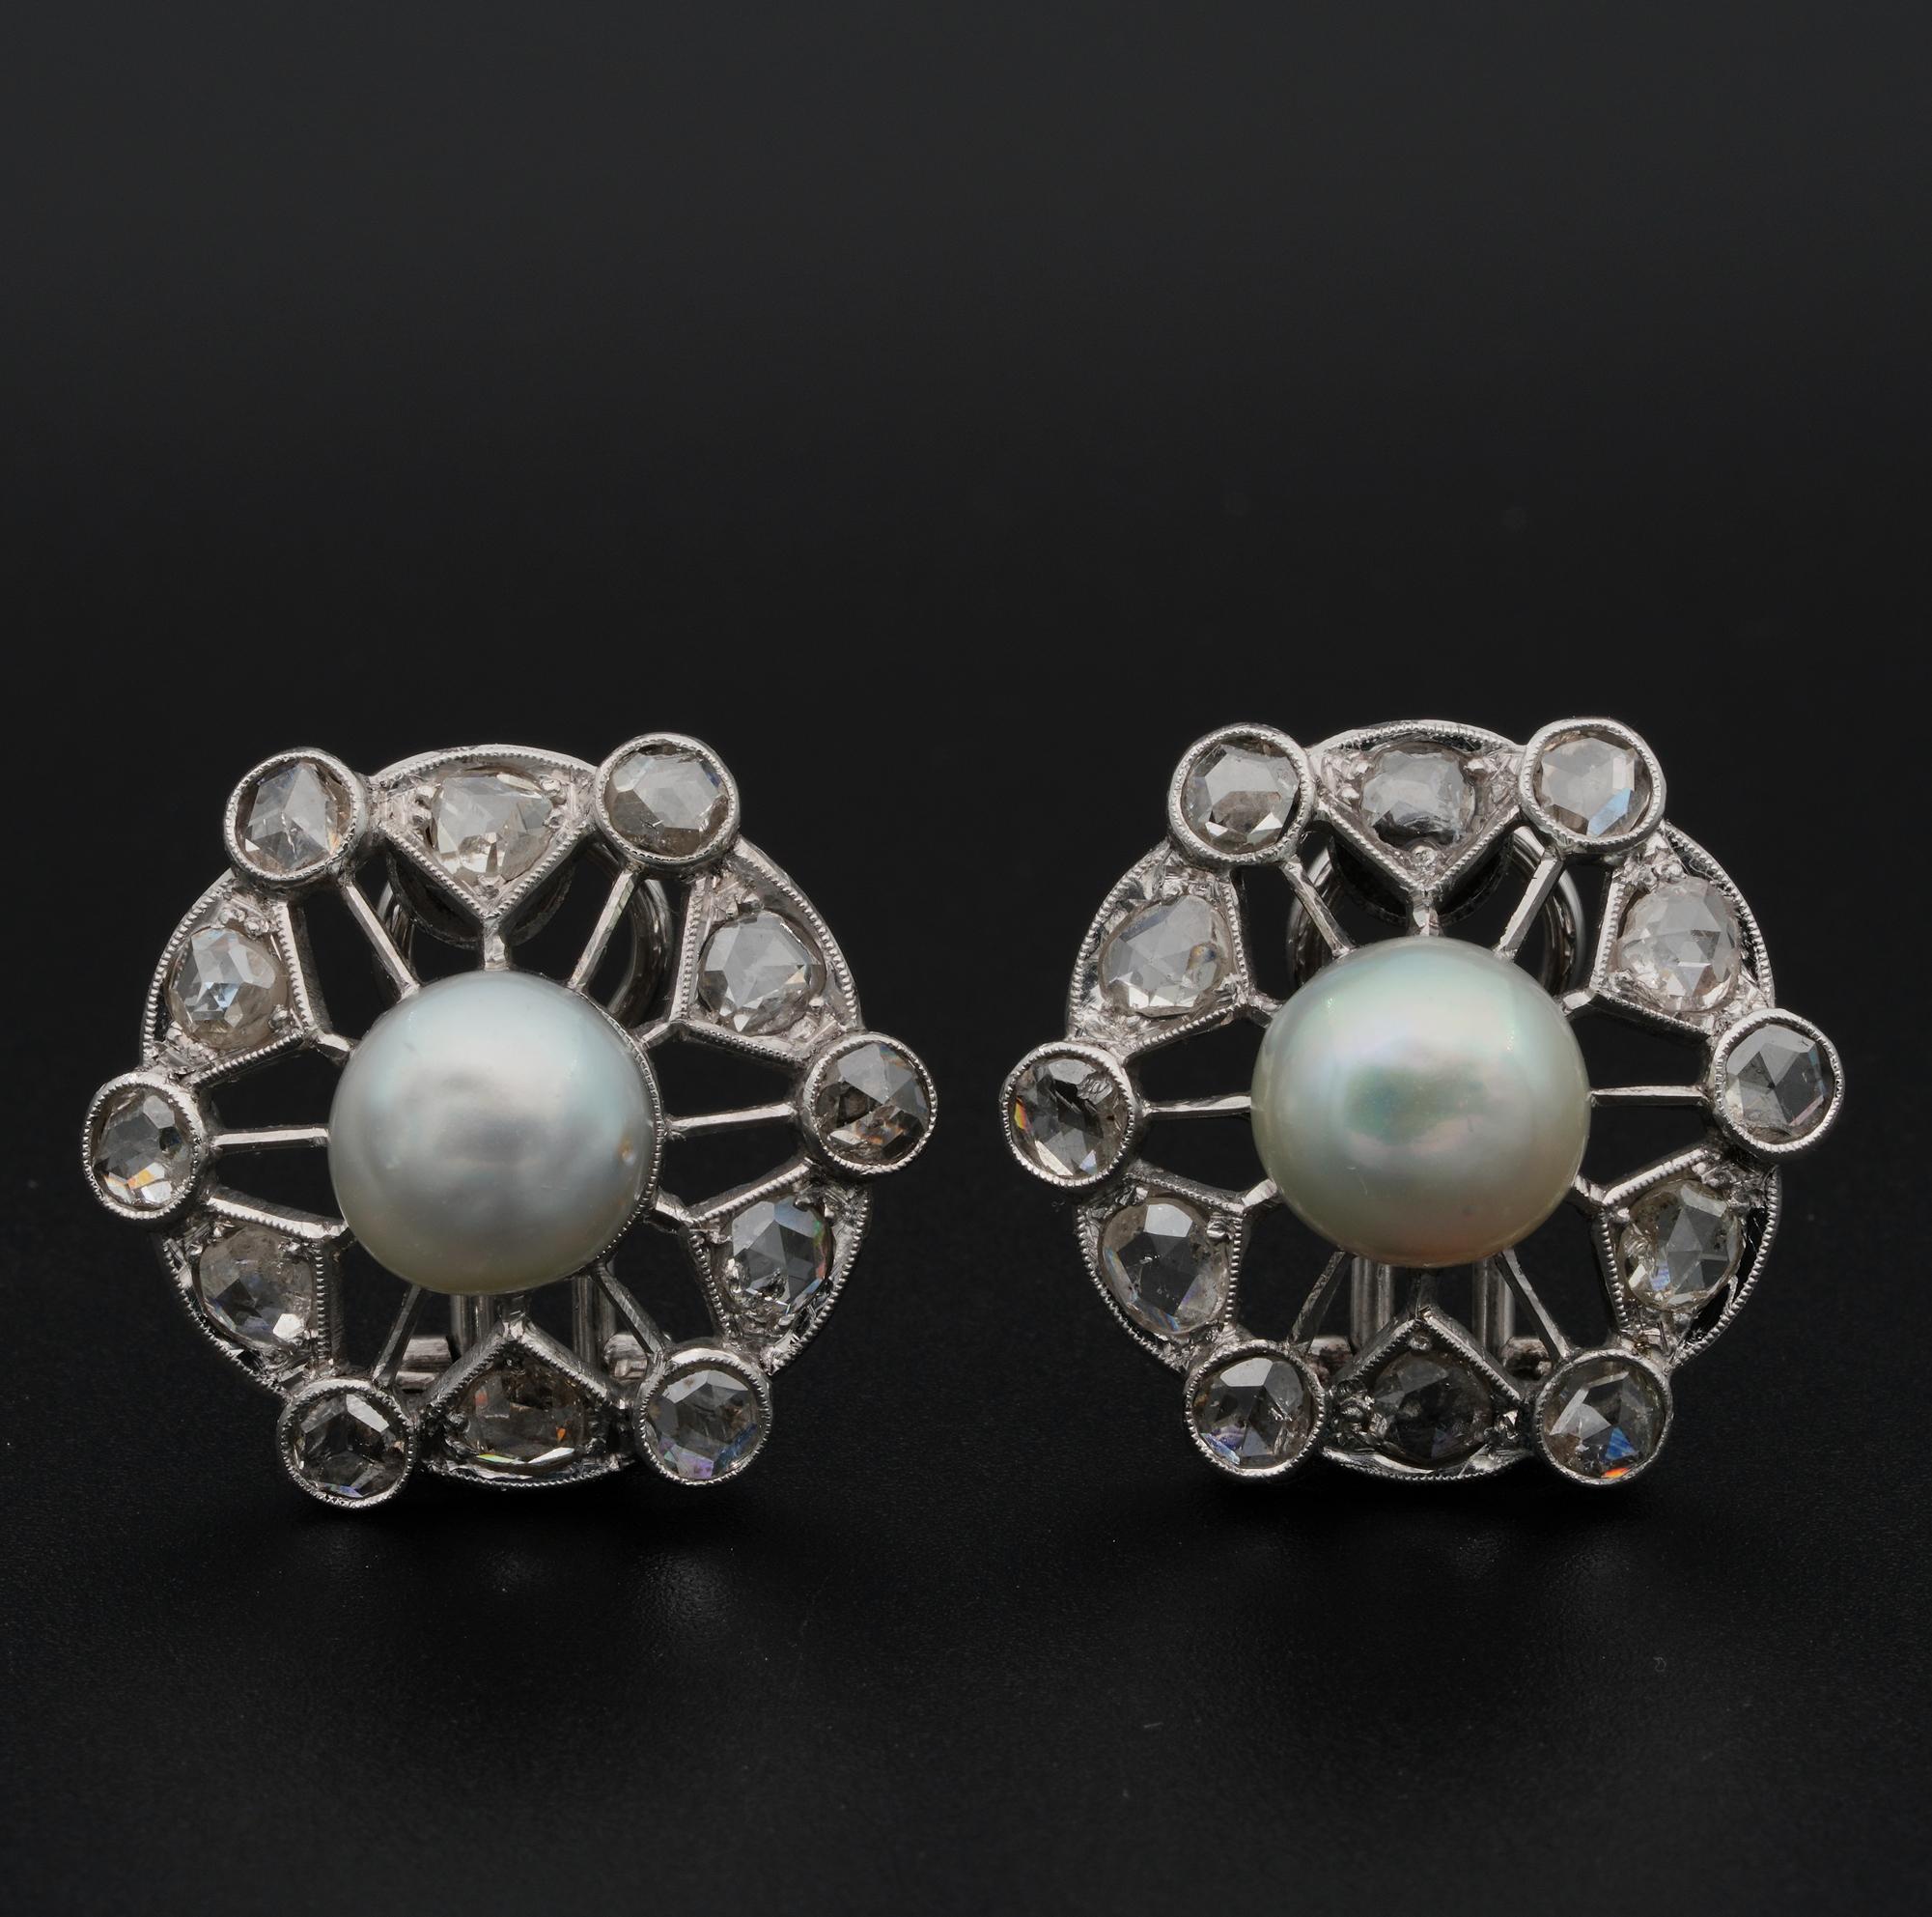 Stellar Everlasting Charm

Spectacular antique version of Natural pearl and Diamond earrings in an unique combination between design, rare materials, to end with finest past workmanship
Estimate date 1930 ca; superbly hand crafted of solid Platinum,